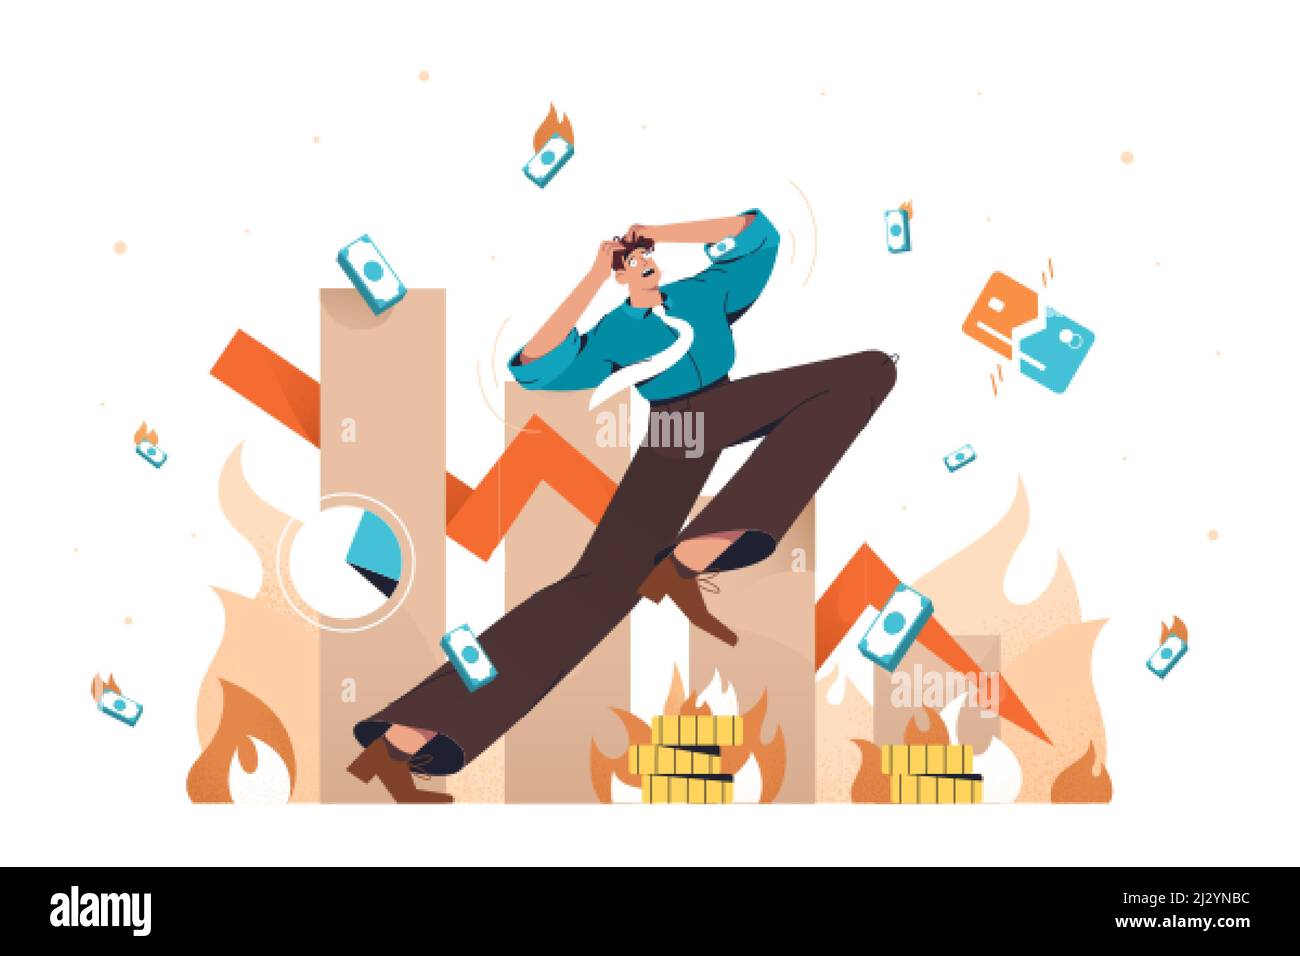 Flat businessman in panic with money problems, bankruptcy and unpaid loan debt. Man losing profits, falling arrow down. Concept of global financial crisis, business failure, economy crash or collapse. Stock Vector